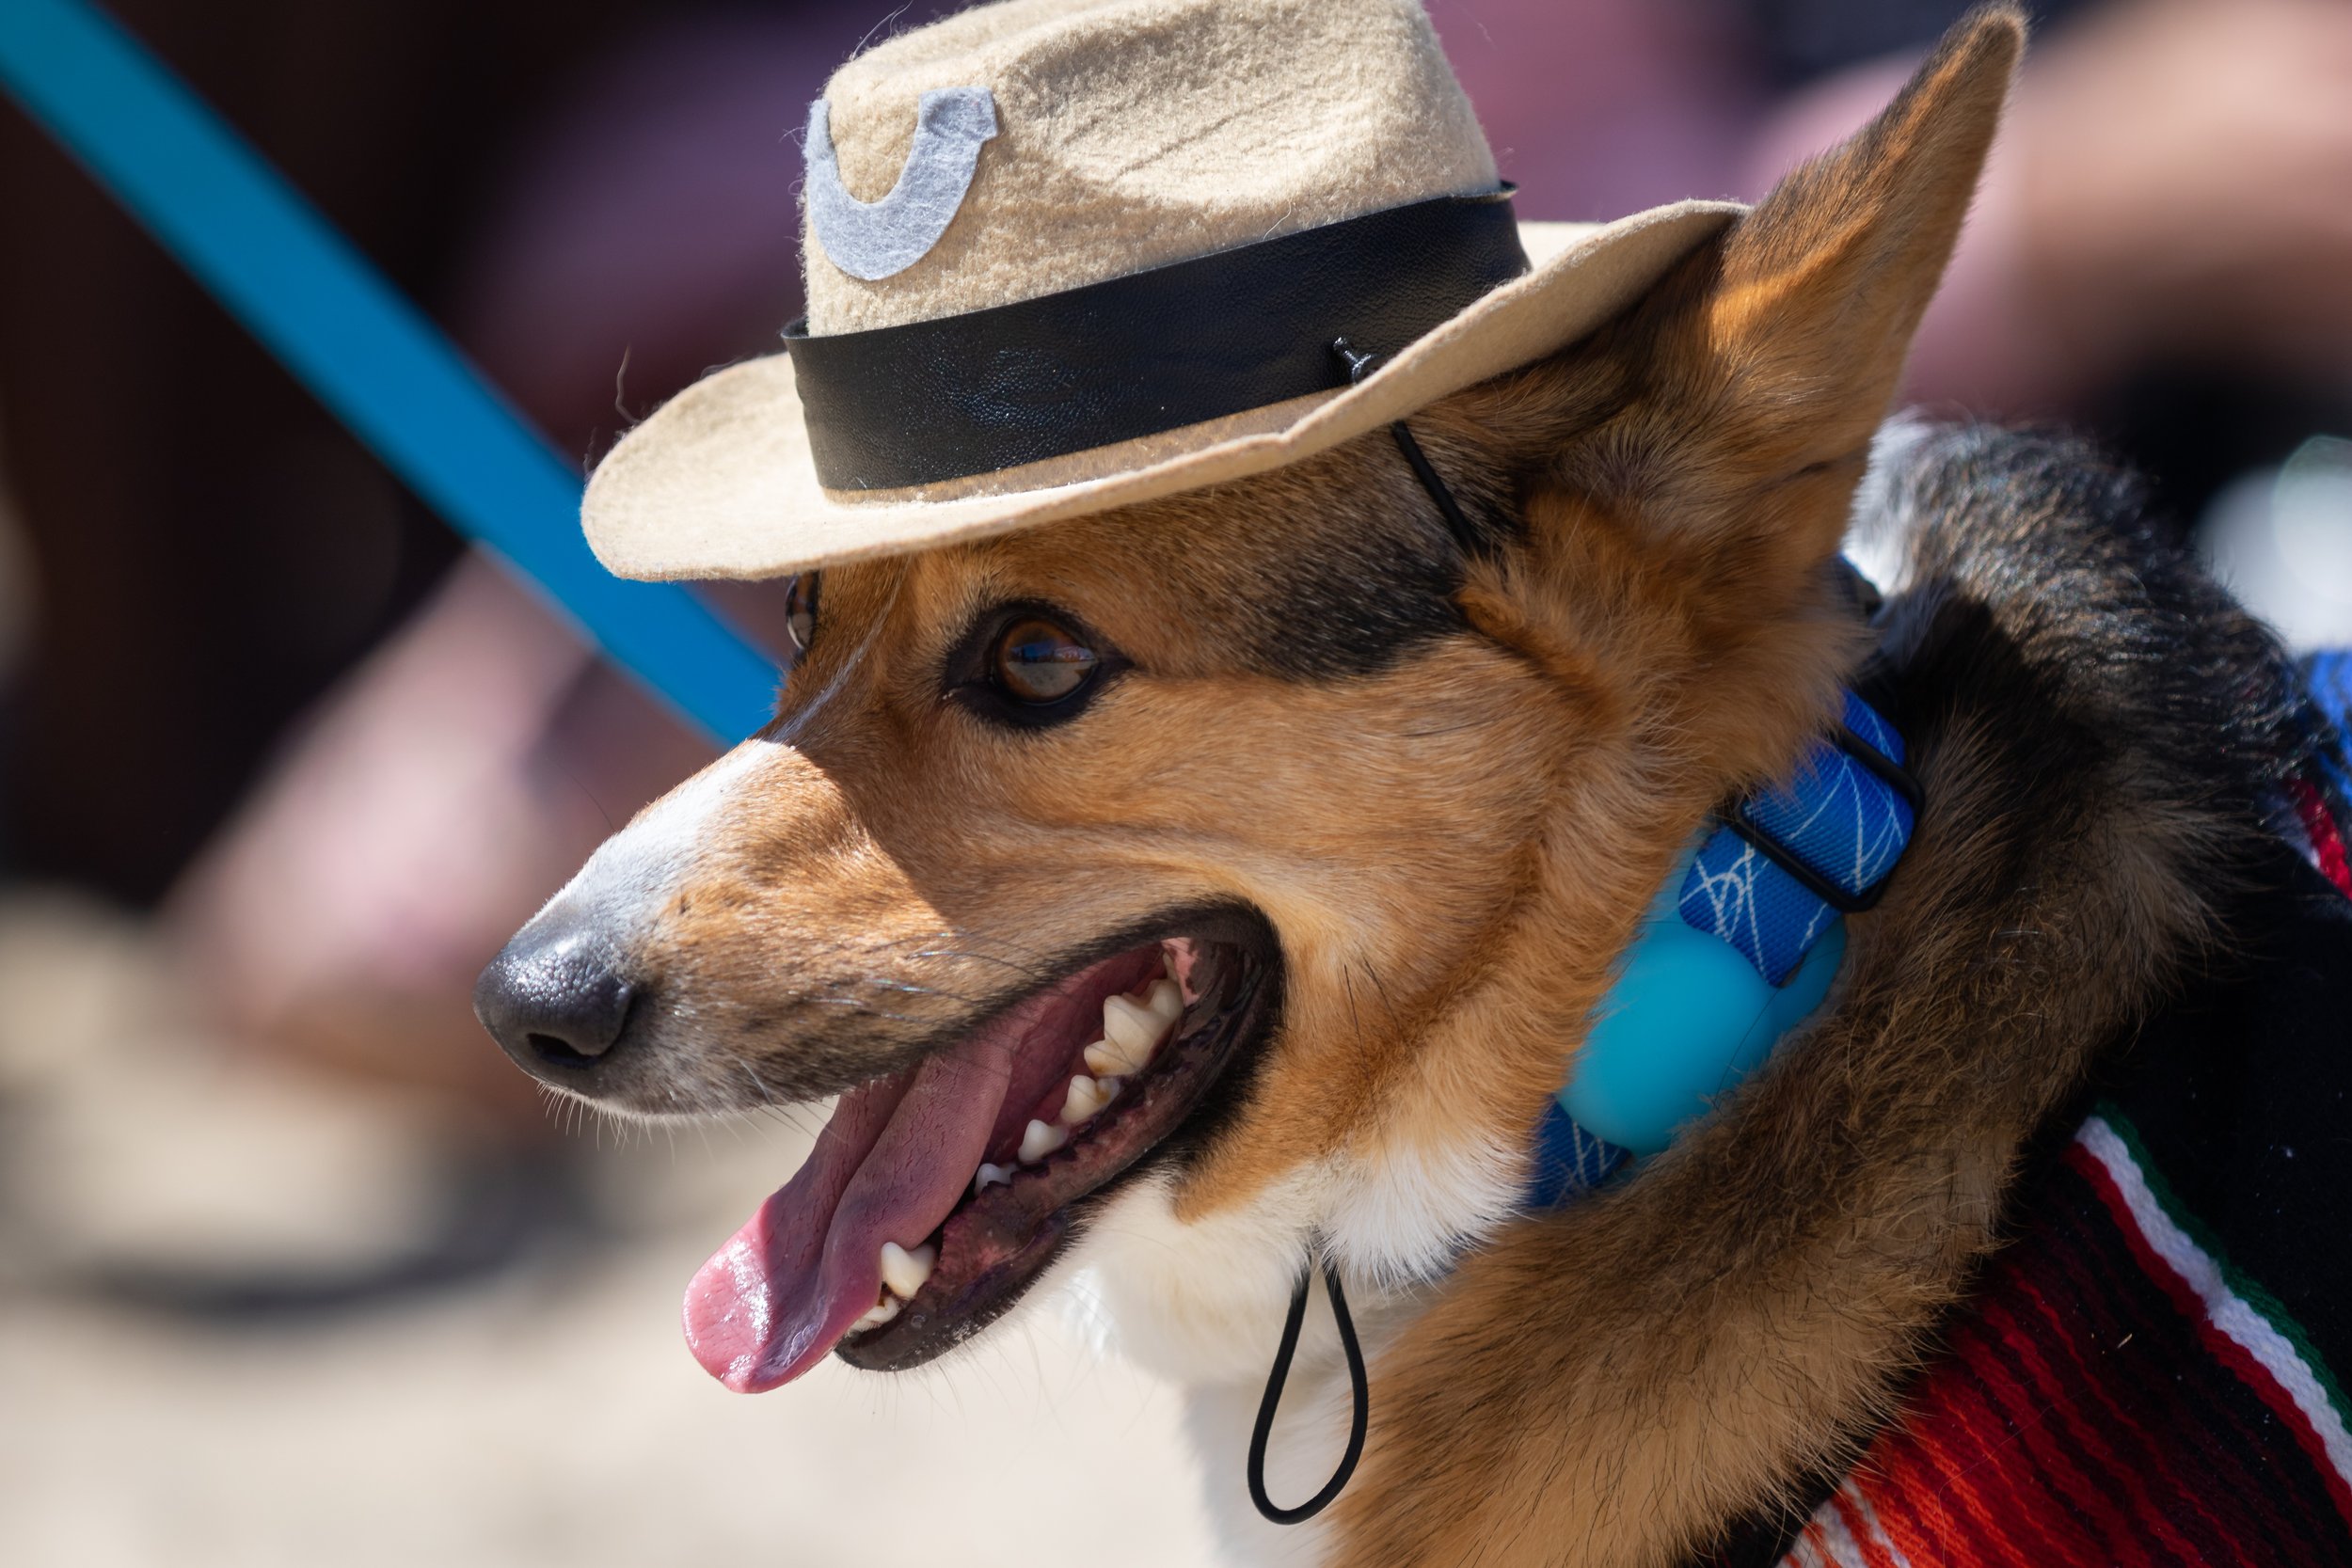  A corgi dressed as a cowboy for the anything goes part of the Best Corgi Costume Contest during Corgi Beach Day at Huntington Dog Beach, Huntington Beach, Calif., on Saturday, April 1, 2023. There were over a thousand people in attendance with over 